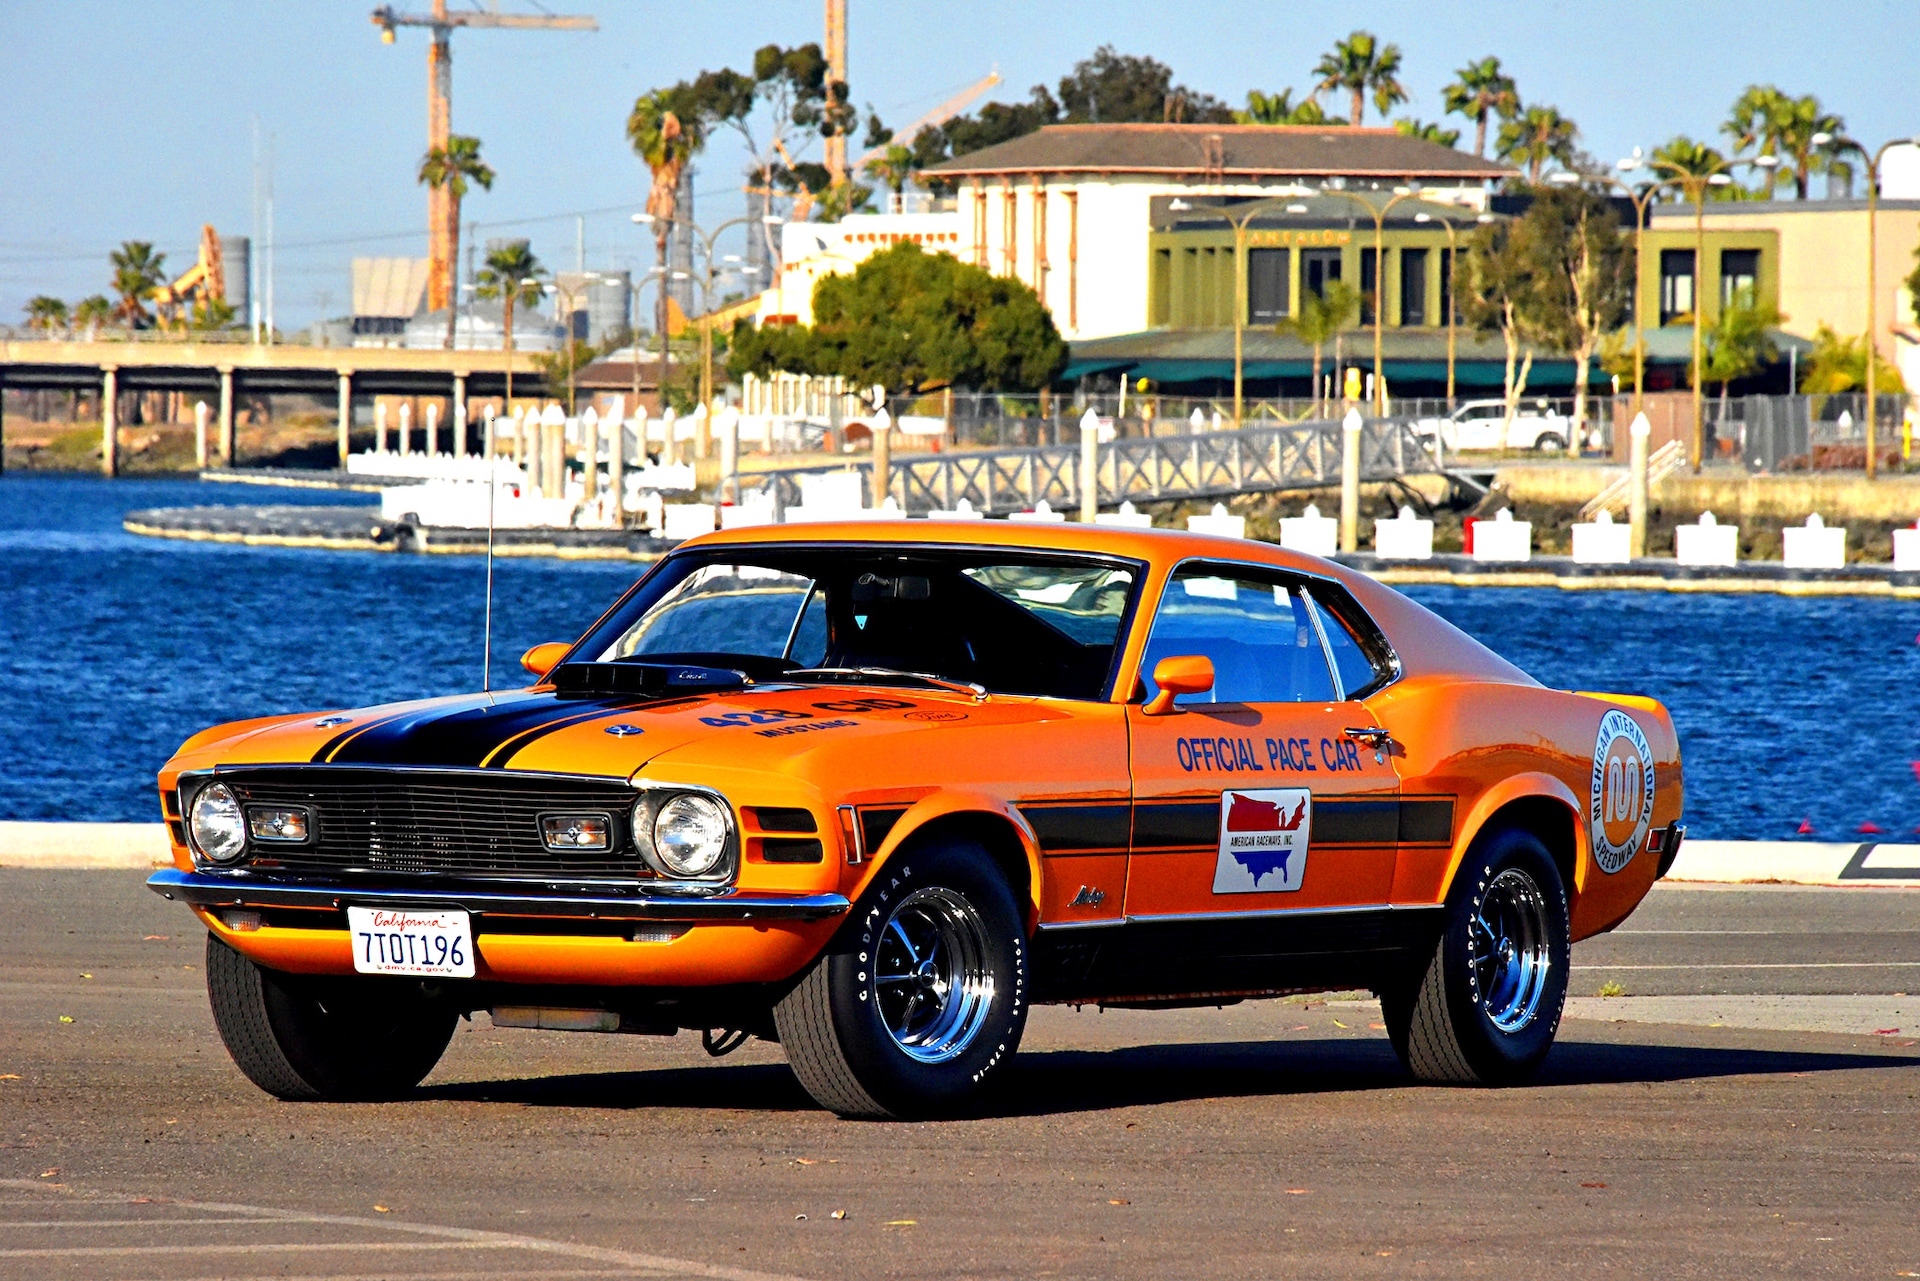 Mustang Of The Day: 1970 Ford Mustang Mach 1 ARI Pace Car